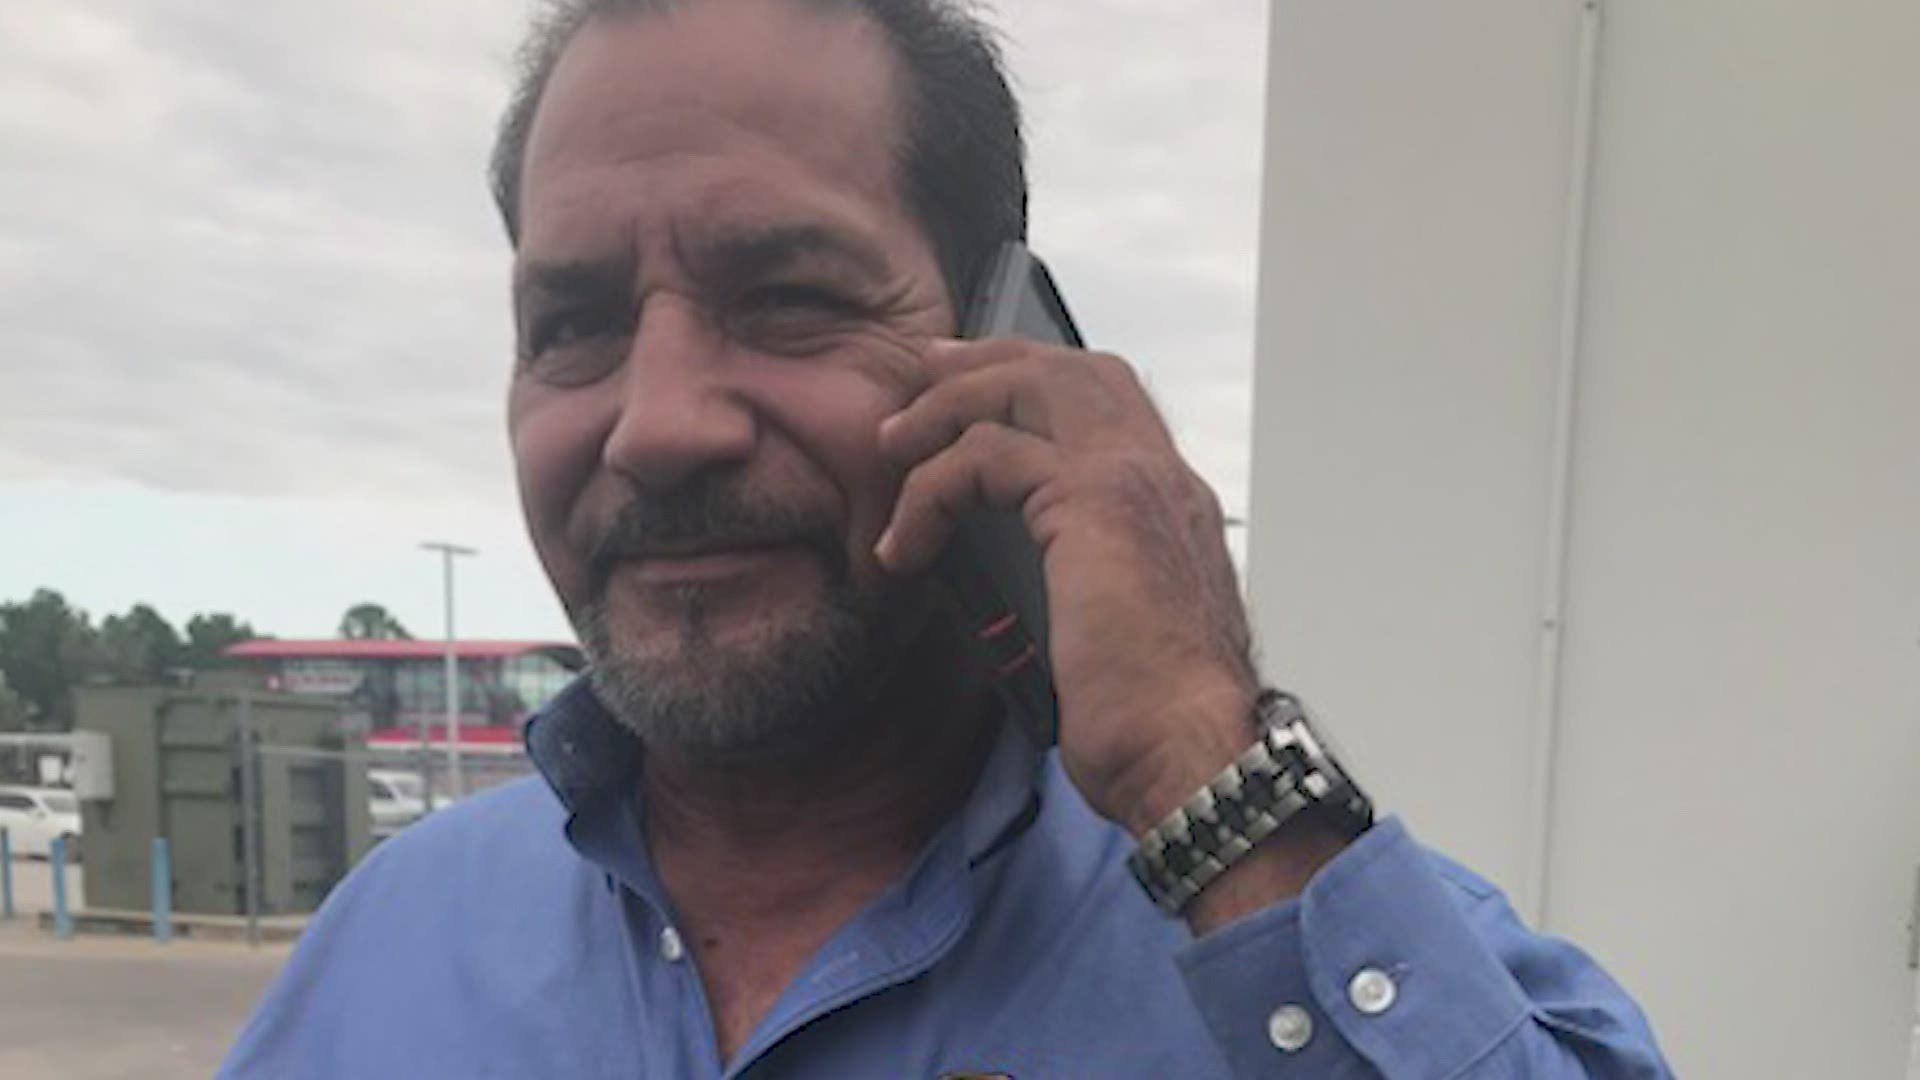 Thursday would have been Federico Cisneros' 59th birthday, but he's not able to celebrate because he was shot to death on Christmas Eve. His family wants answers.